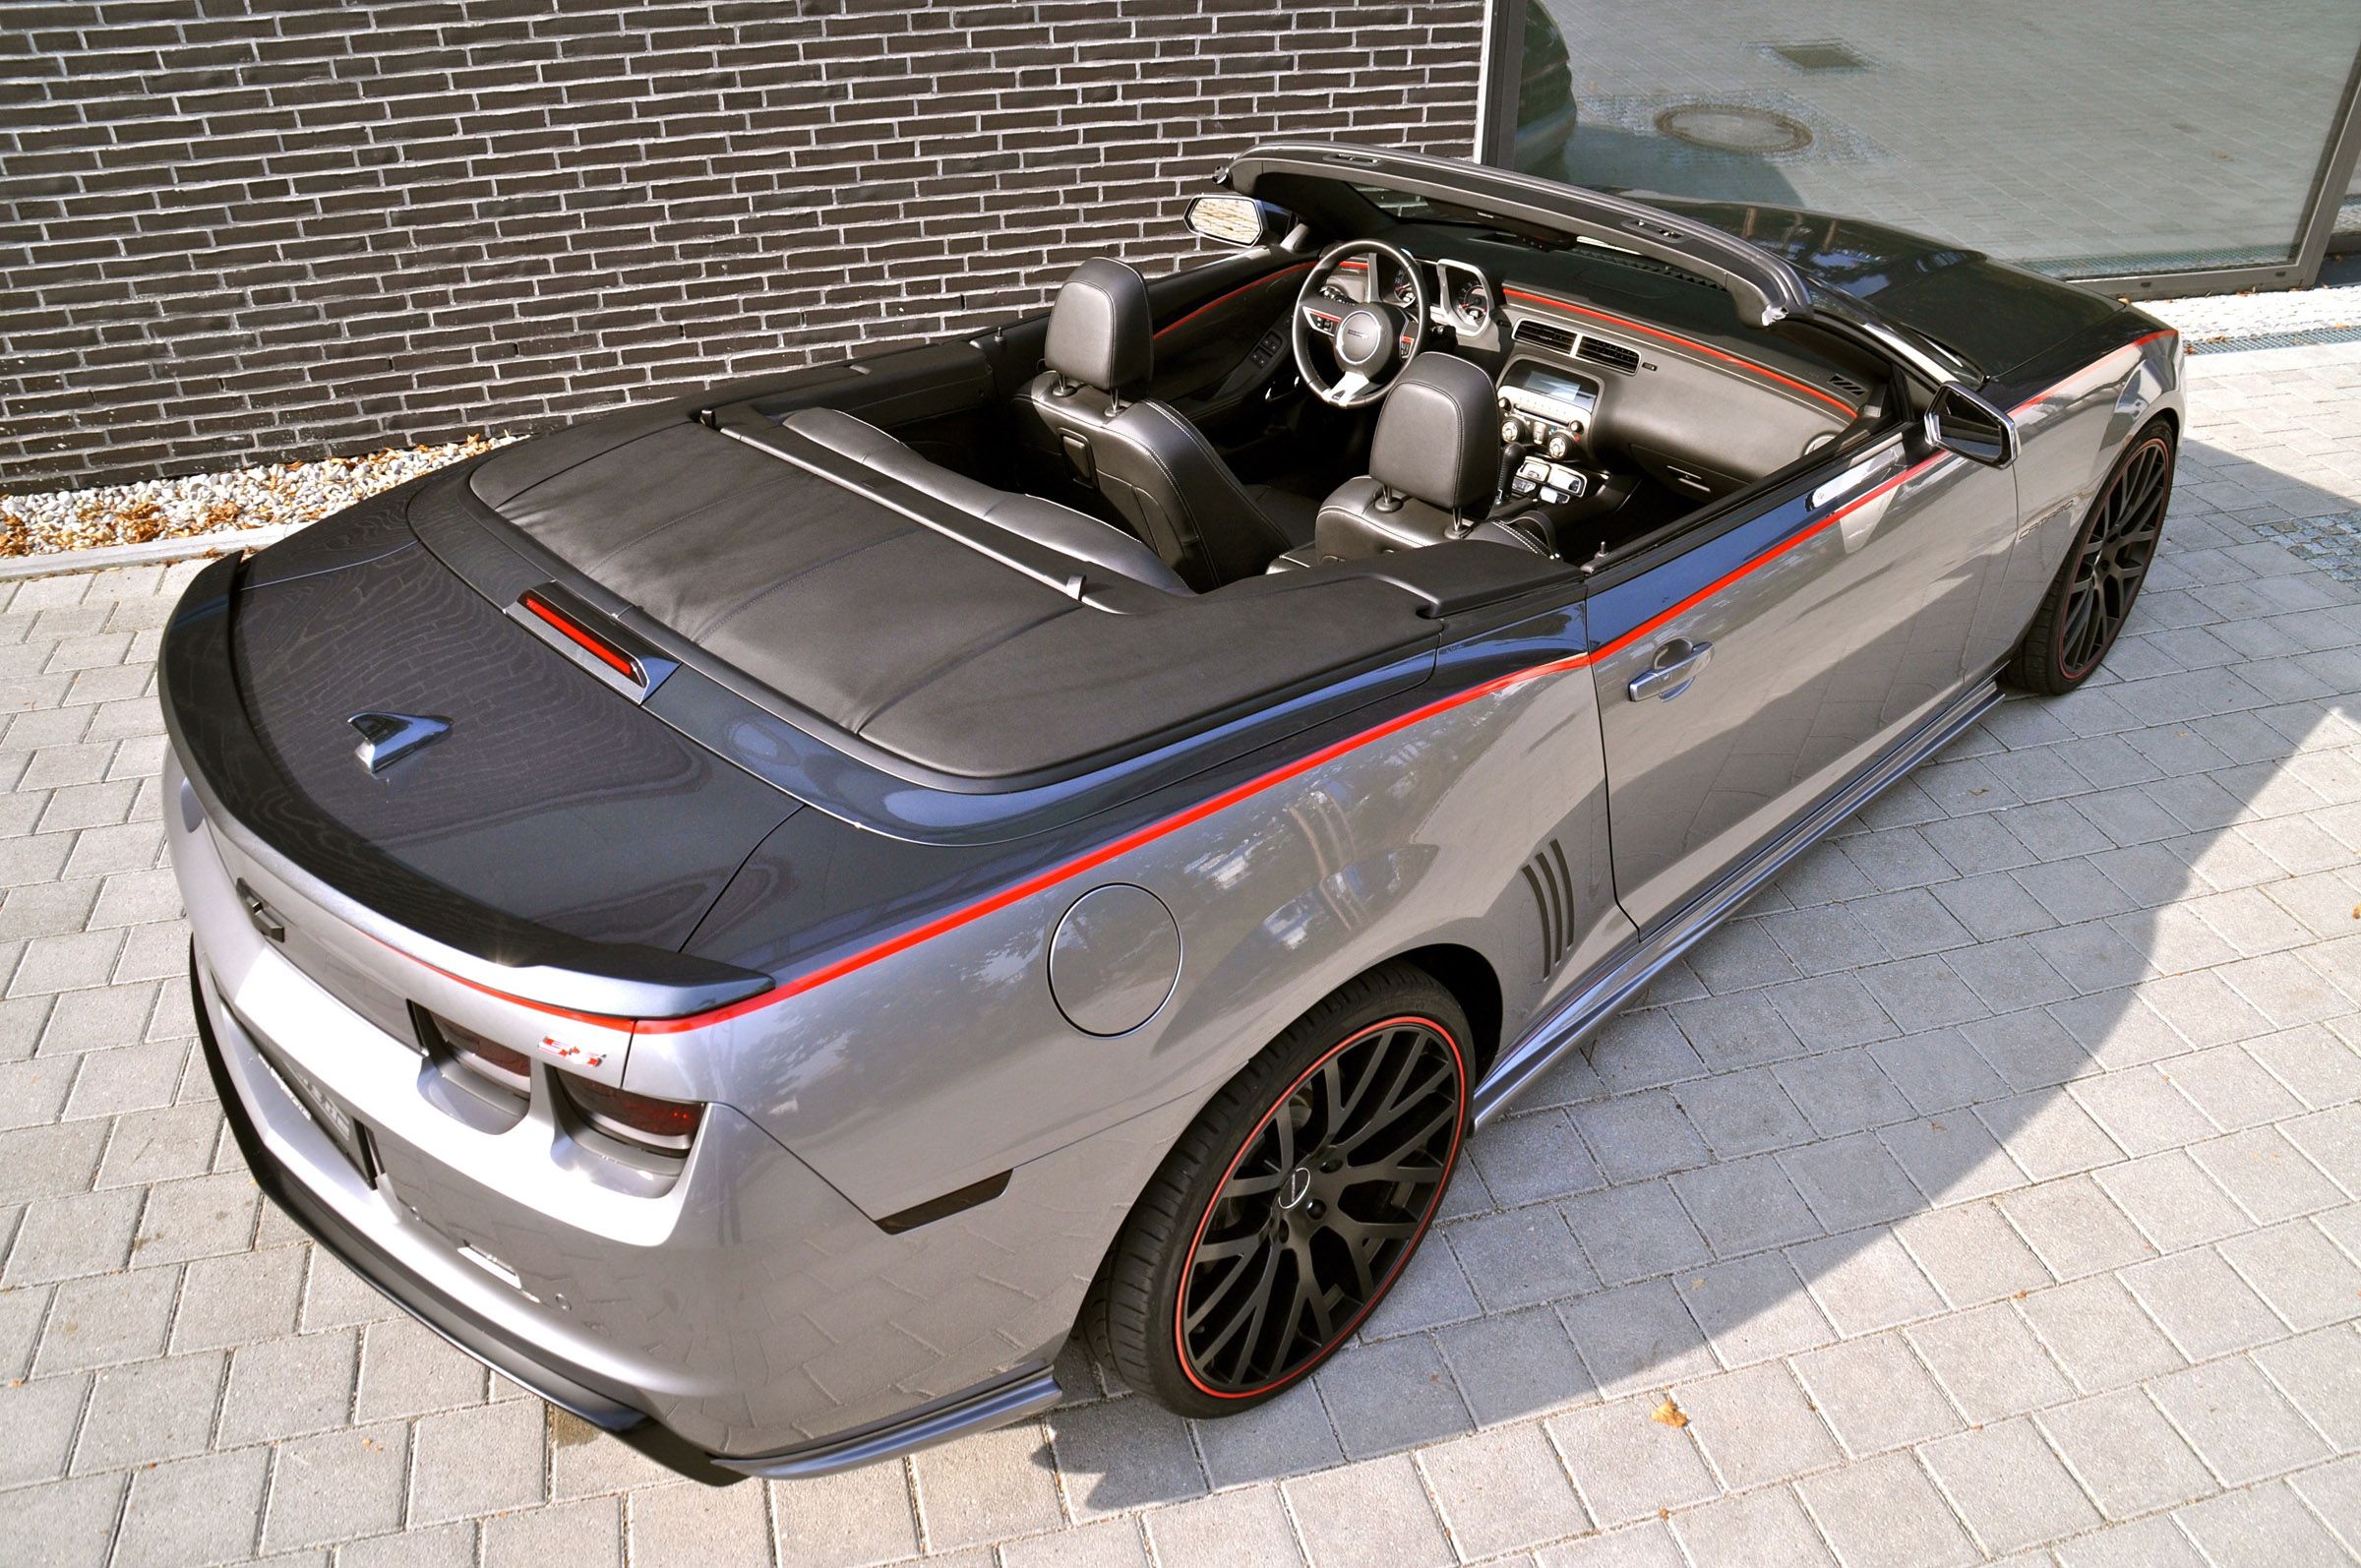 2012 Chevrolet Camaro 2SS Convertible by Geiger Cars